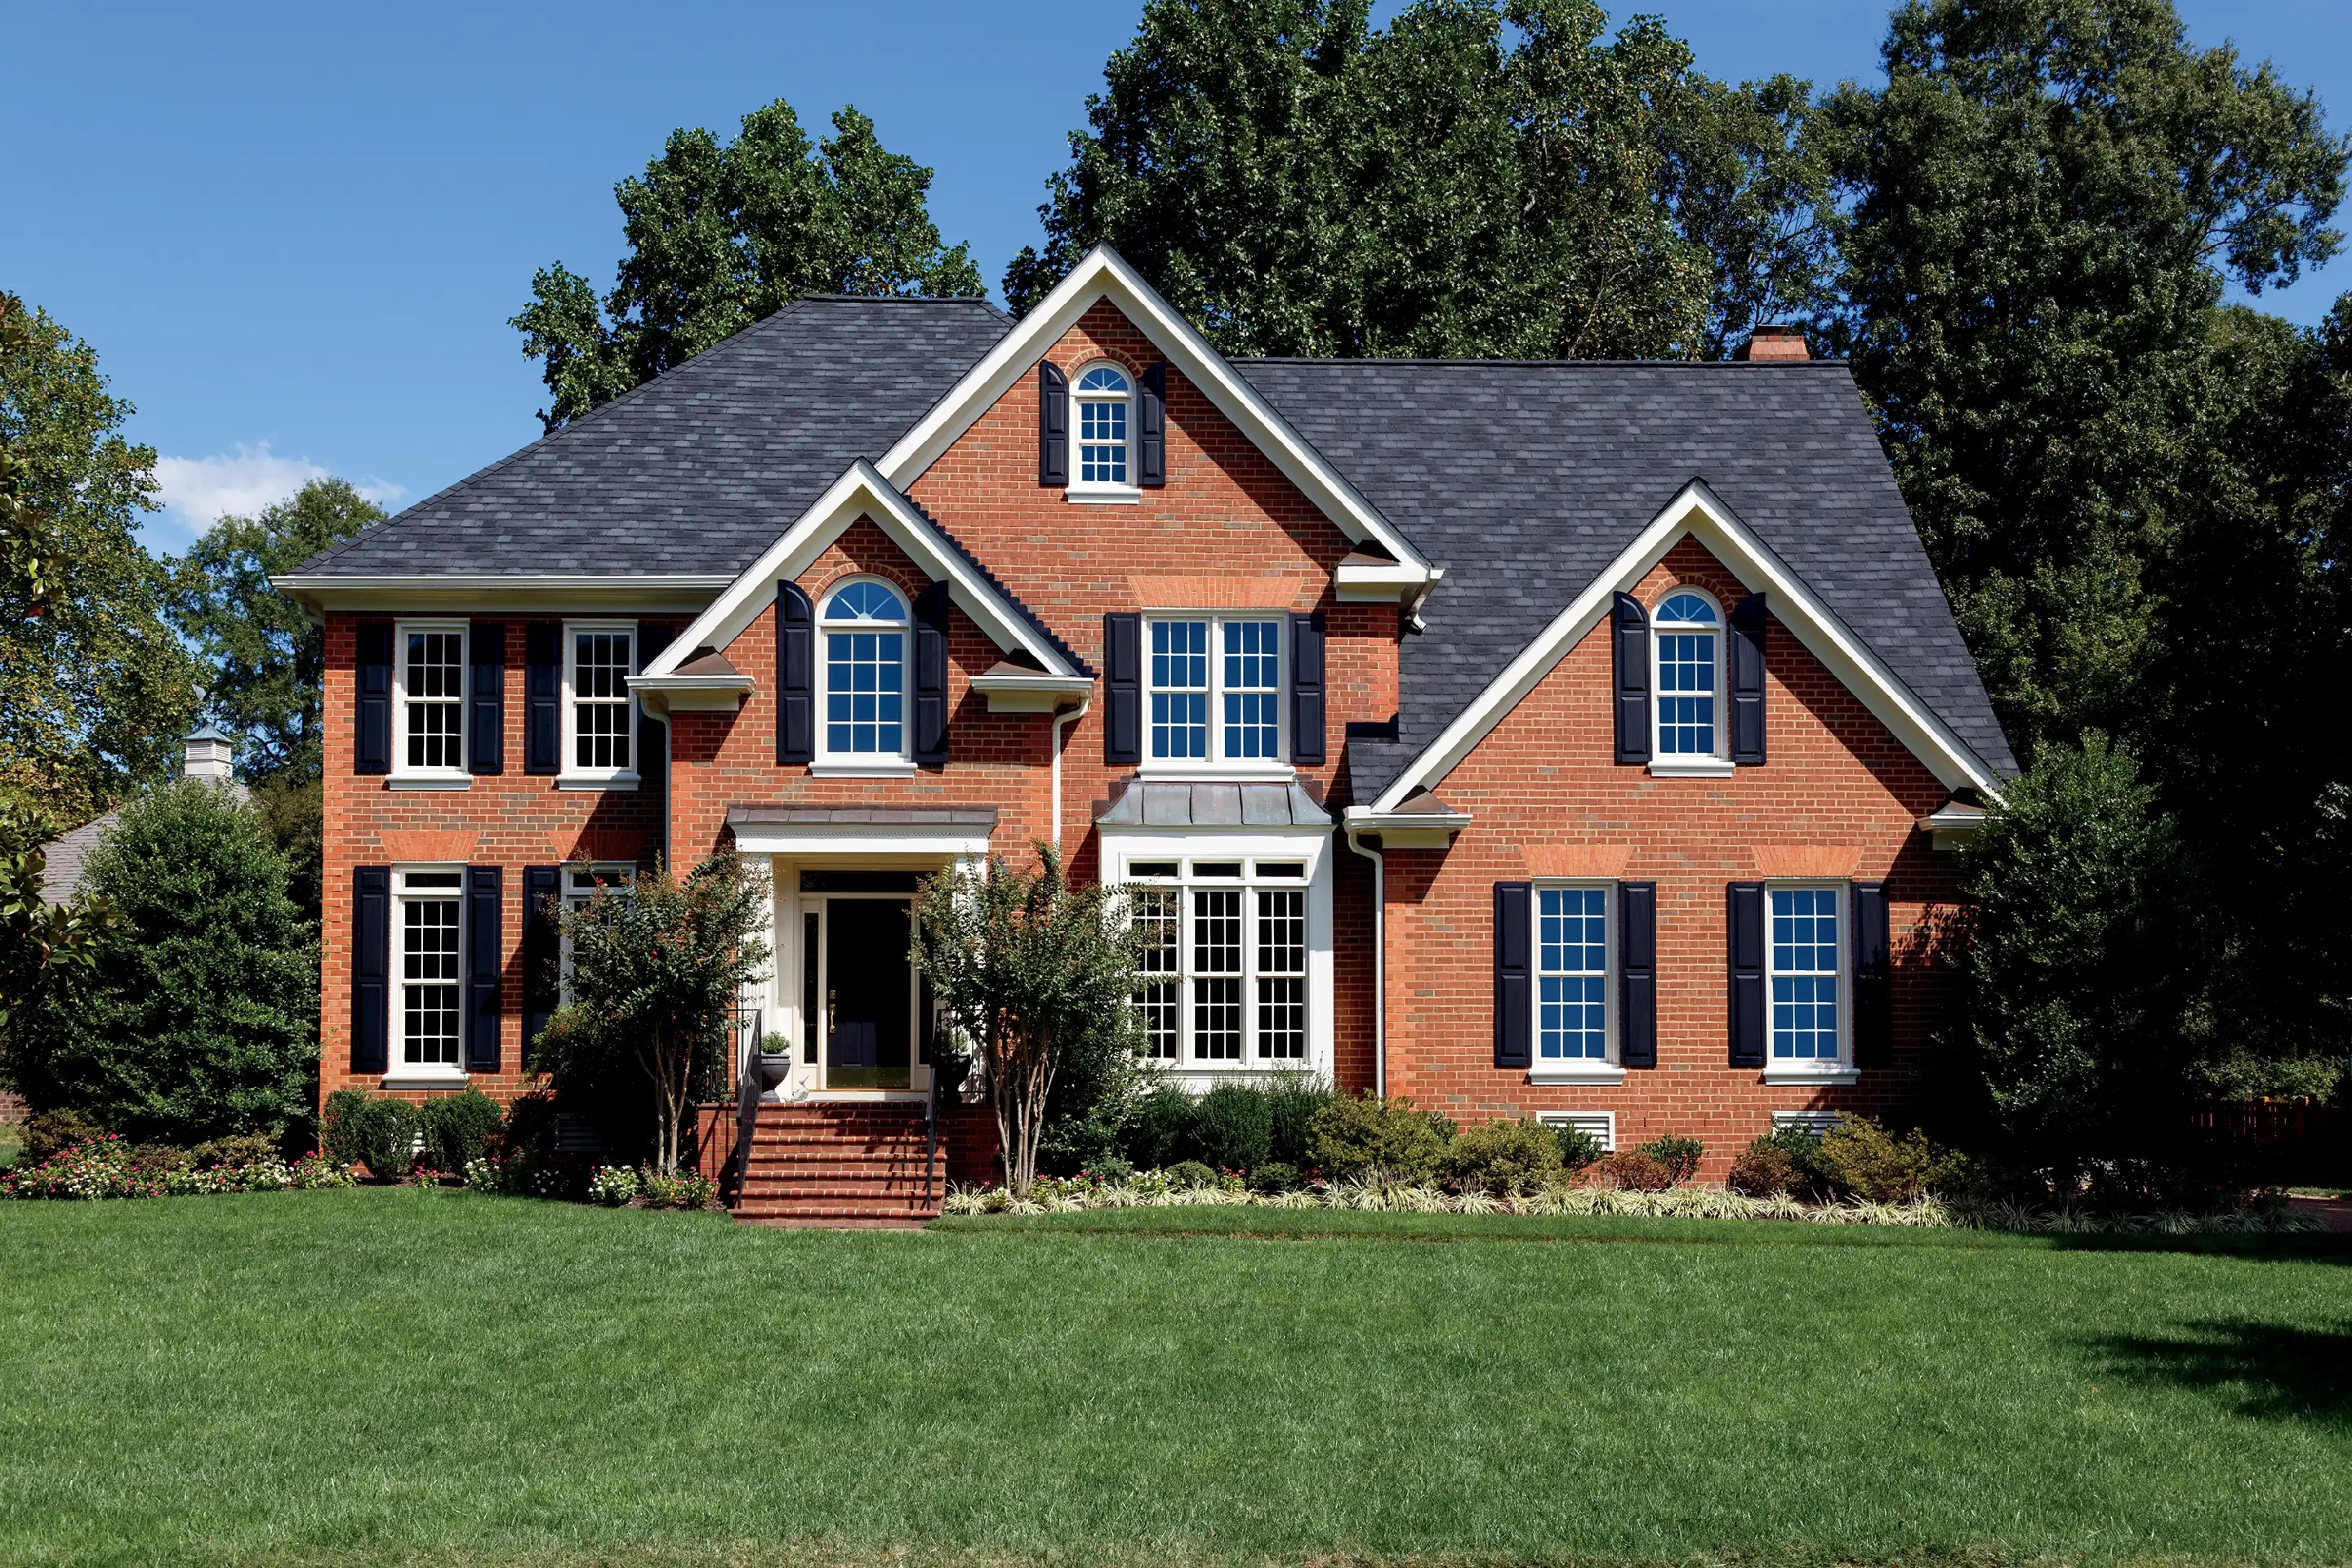 Exterior view of a brick home featuring white Marvin Replacement windows and black shutters.